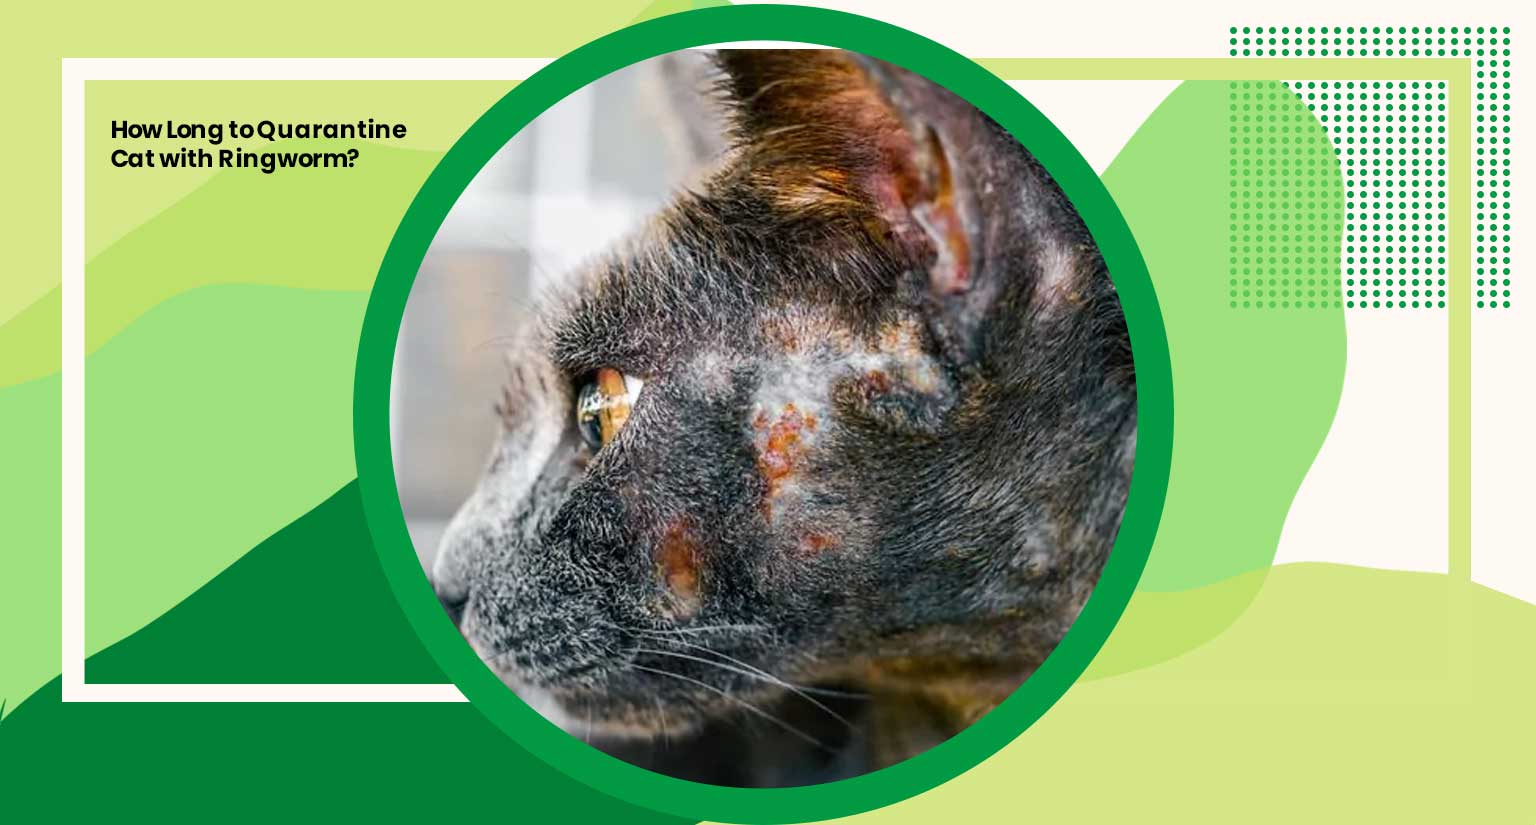 How Long to Quarantine Cat with Ringworm